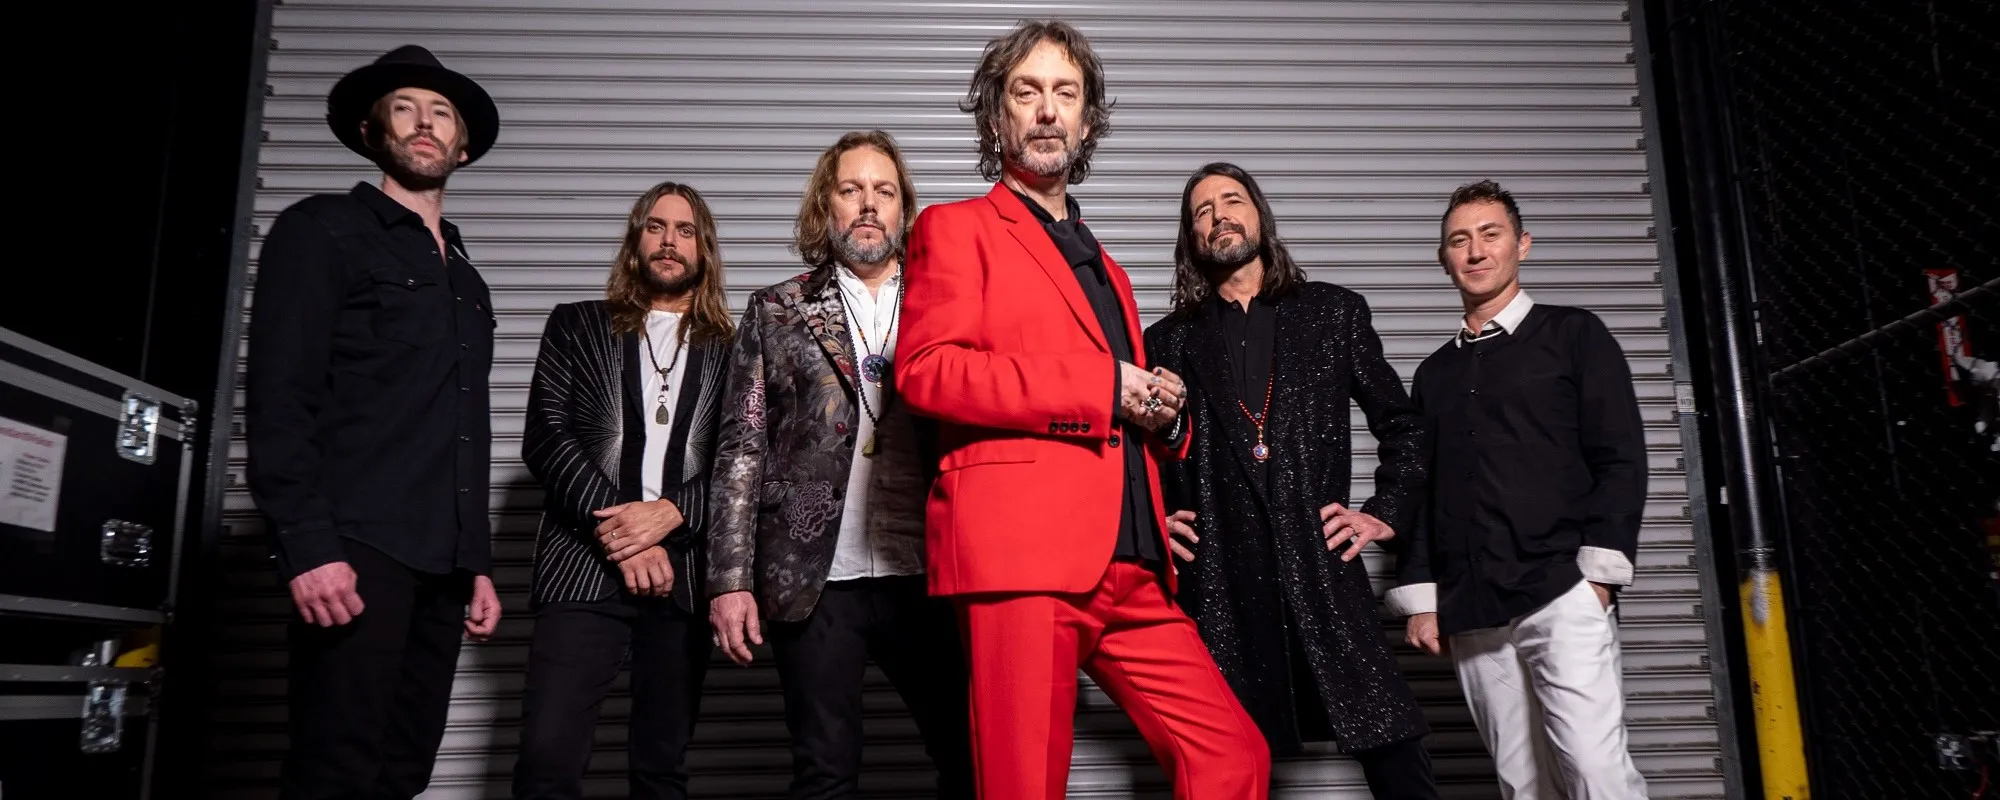 Listen to The Black Crowes Kicking Out the Soul-Rock Jams with New Single “Cross Your Fingers”